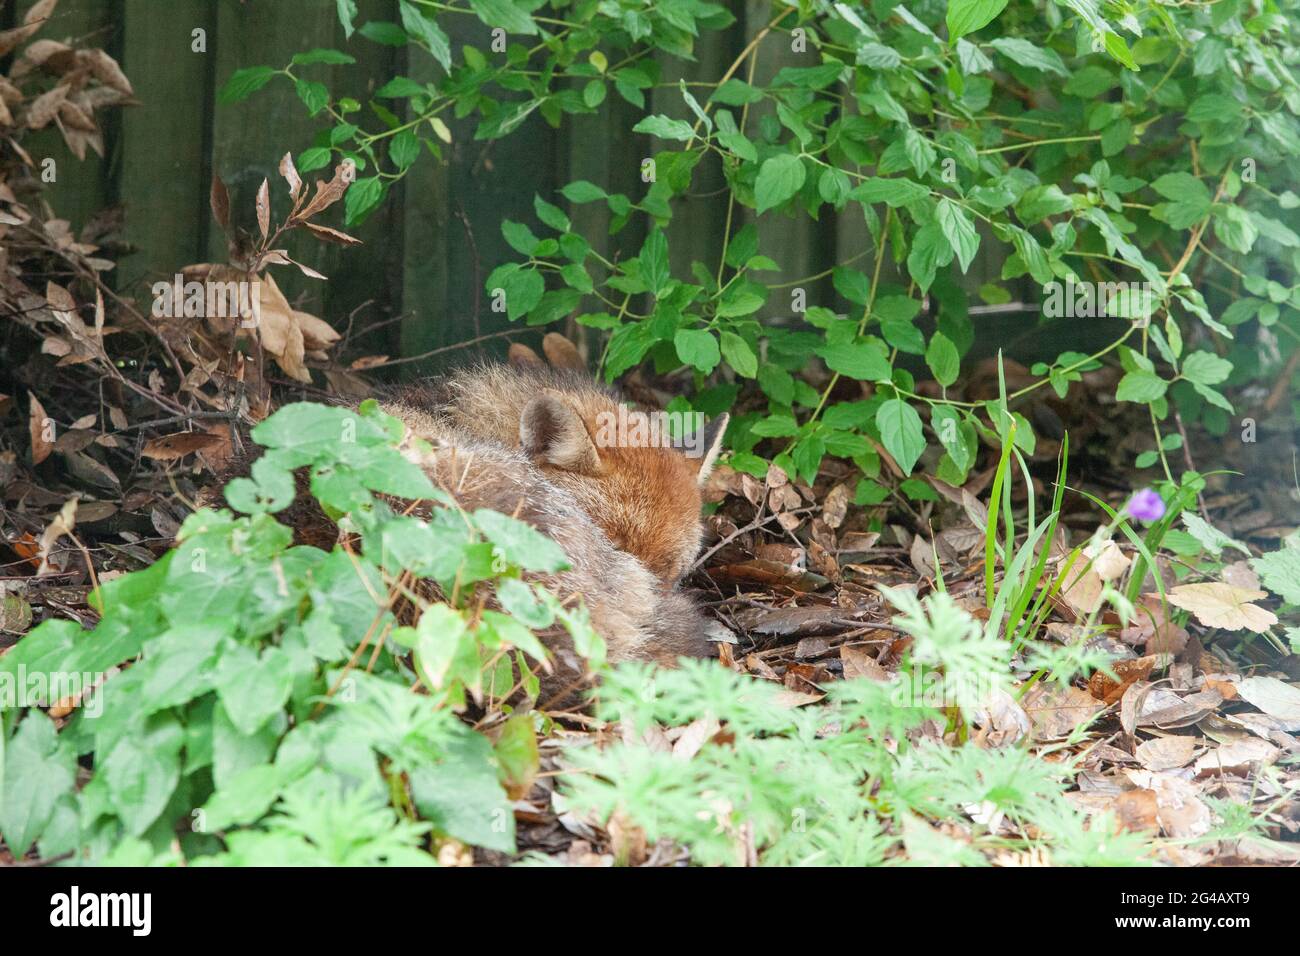 UK weather, 20 June 2021: on the summer solstice grey skies and drizzle make worshipping the sun difficult. For nocturnal foxes the daytime is for sleeping anyway. This dog fox, resident in a garden in Clapham, south London, snoozes and yawns on a bed of leaves under a holm oak. Anna Watson/Alamy Live News Stock Photo